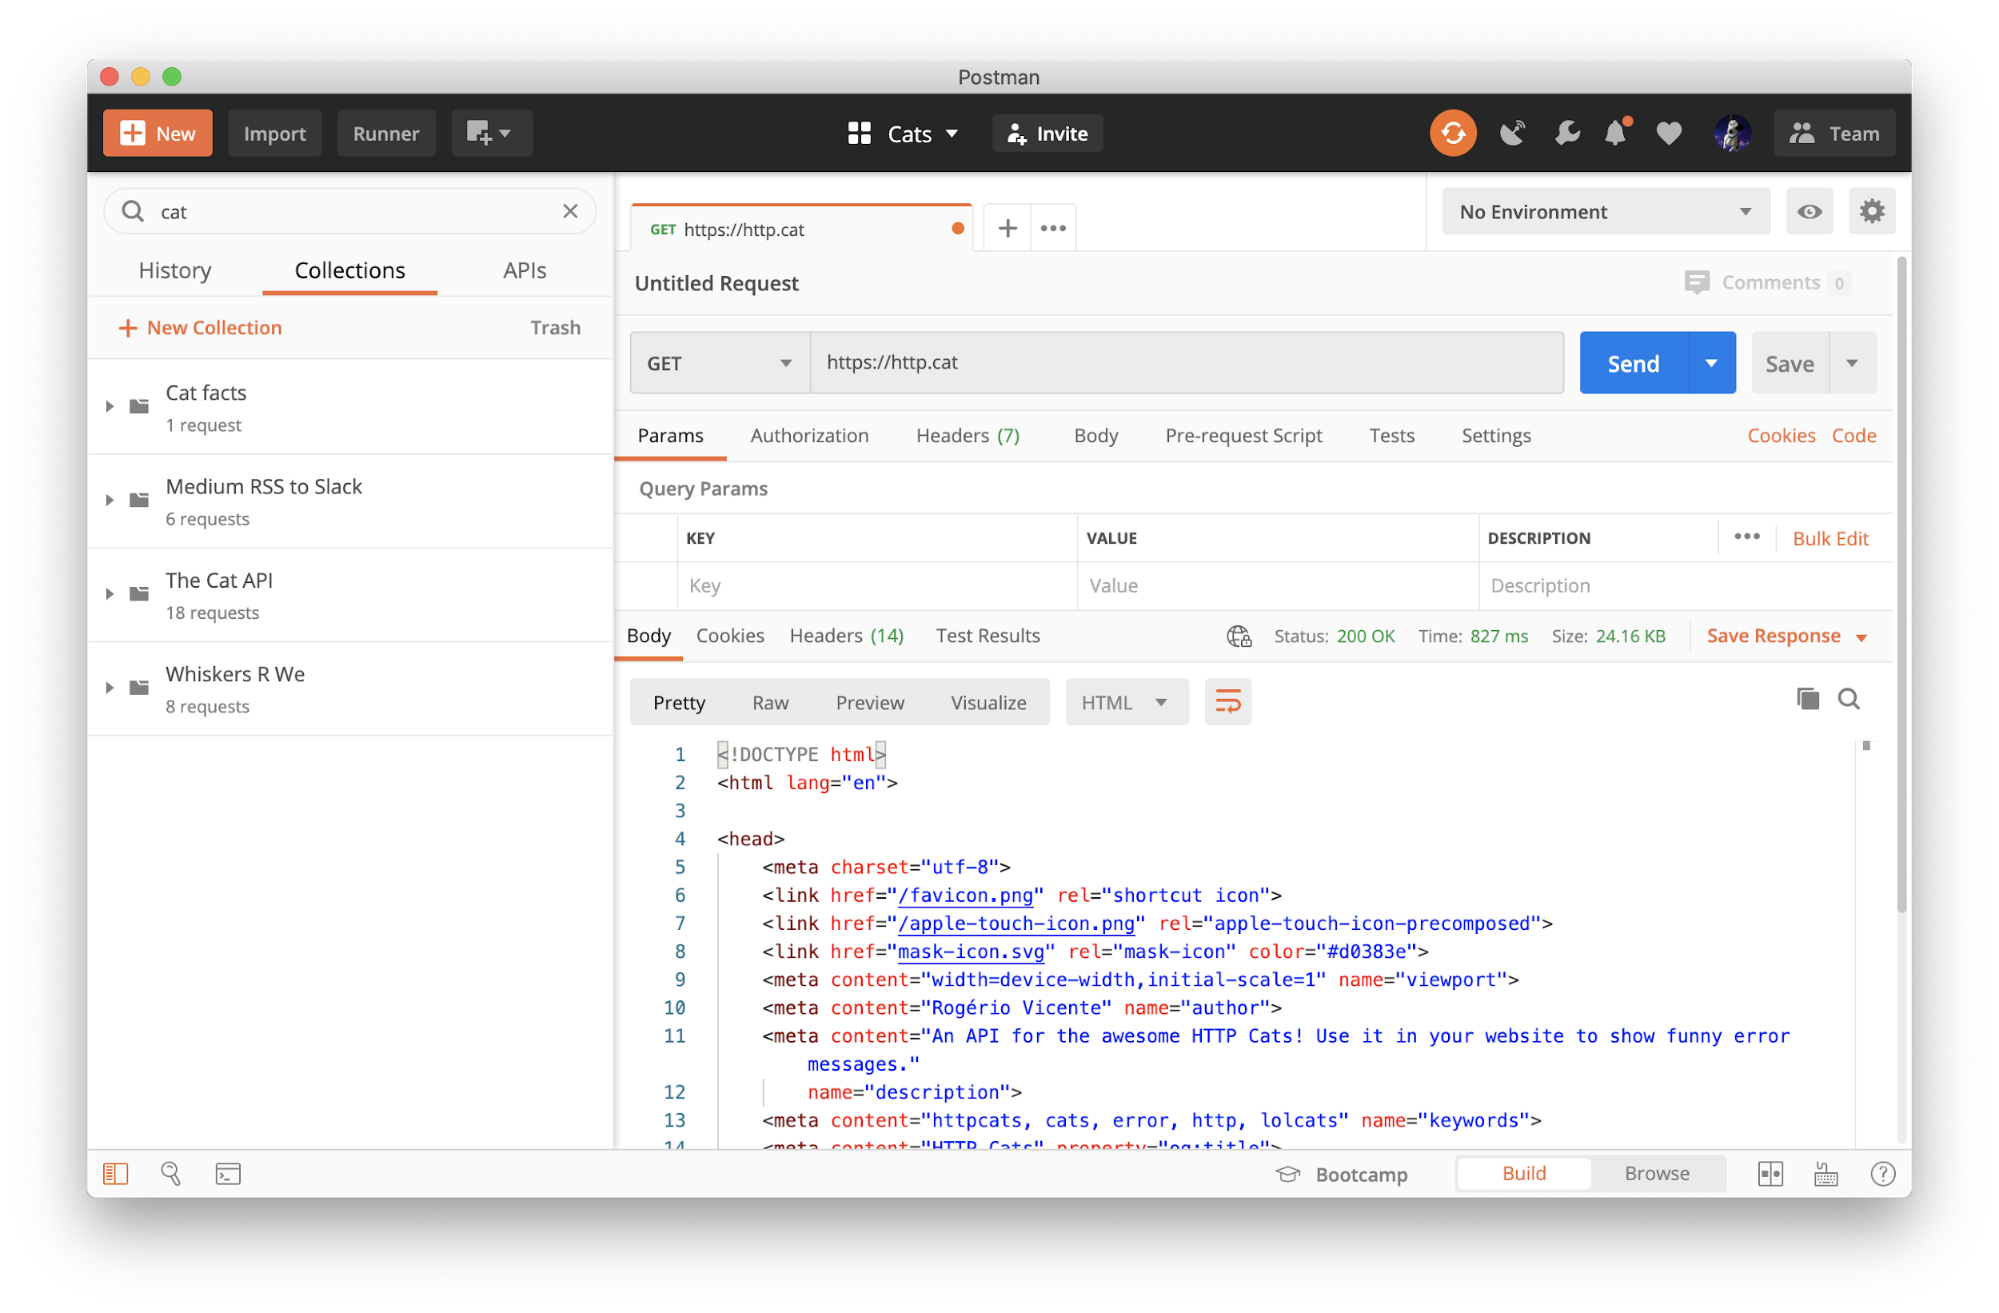 Use Postman as an API client to work with the Cat API